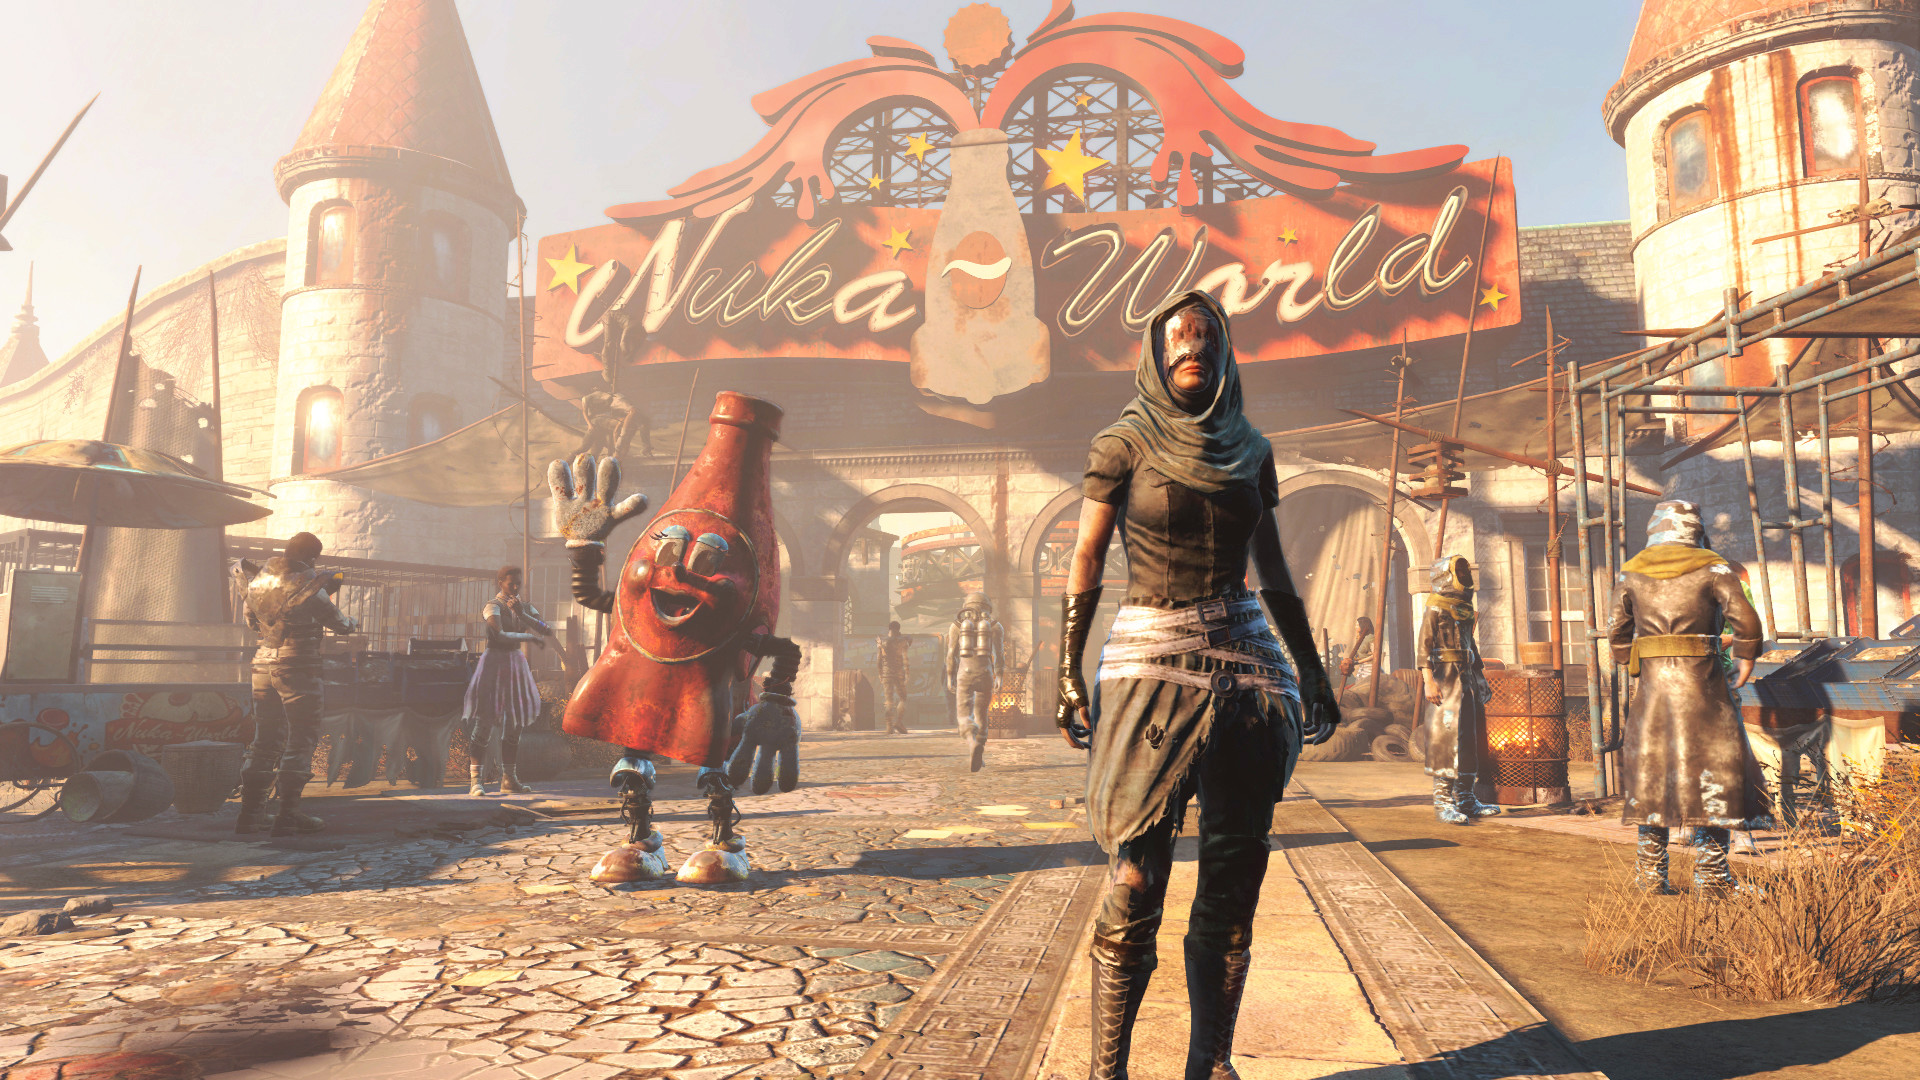 Fallout 4 Nuka World Xbox Version Full Game Free Download